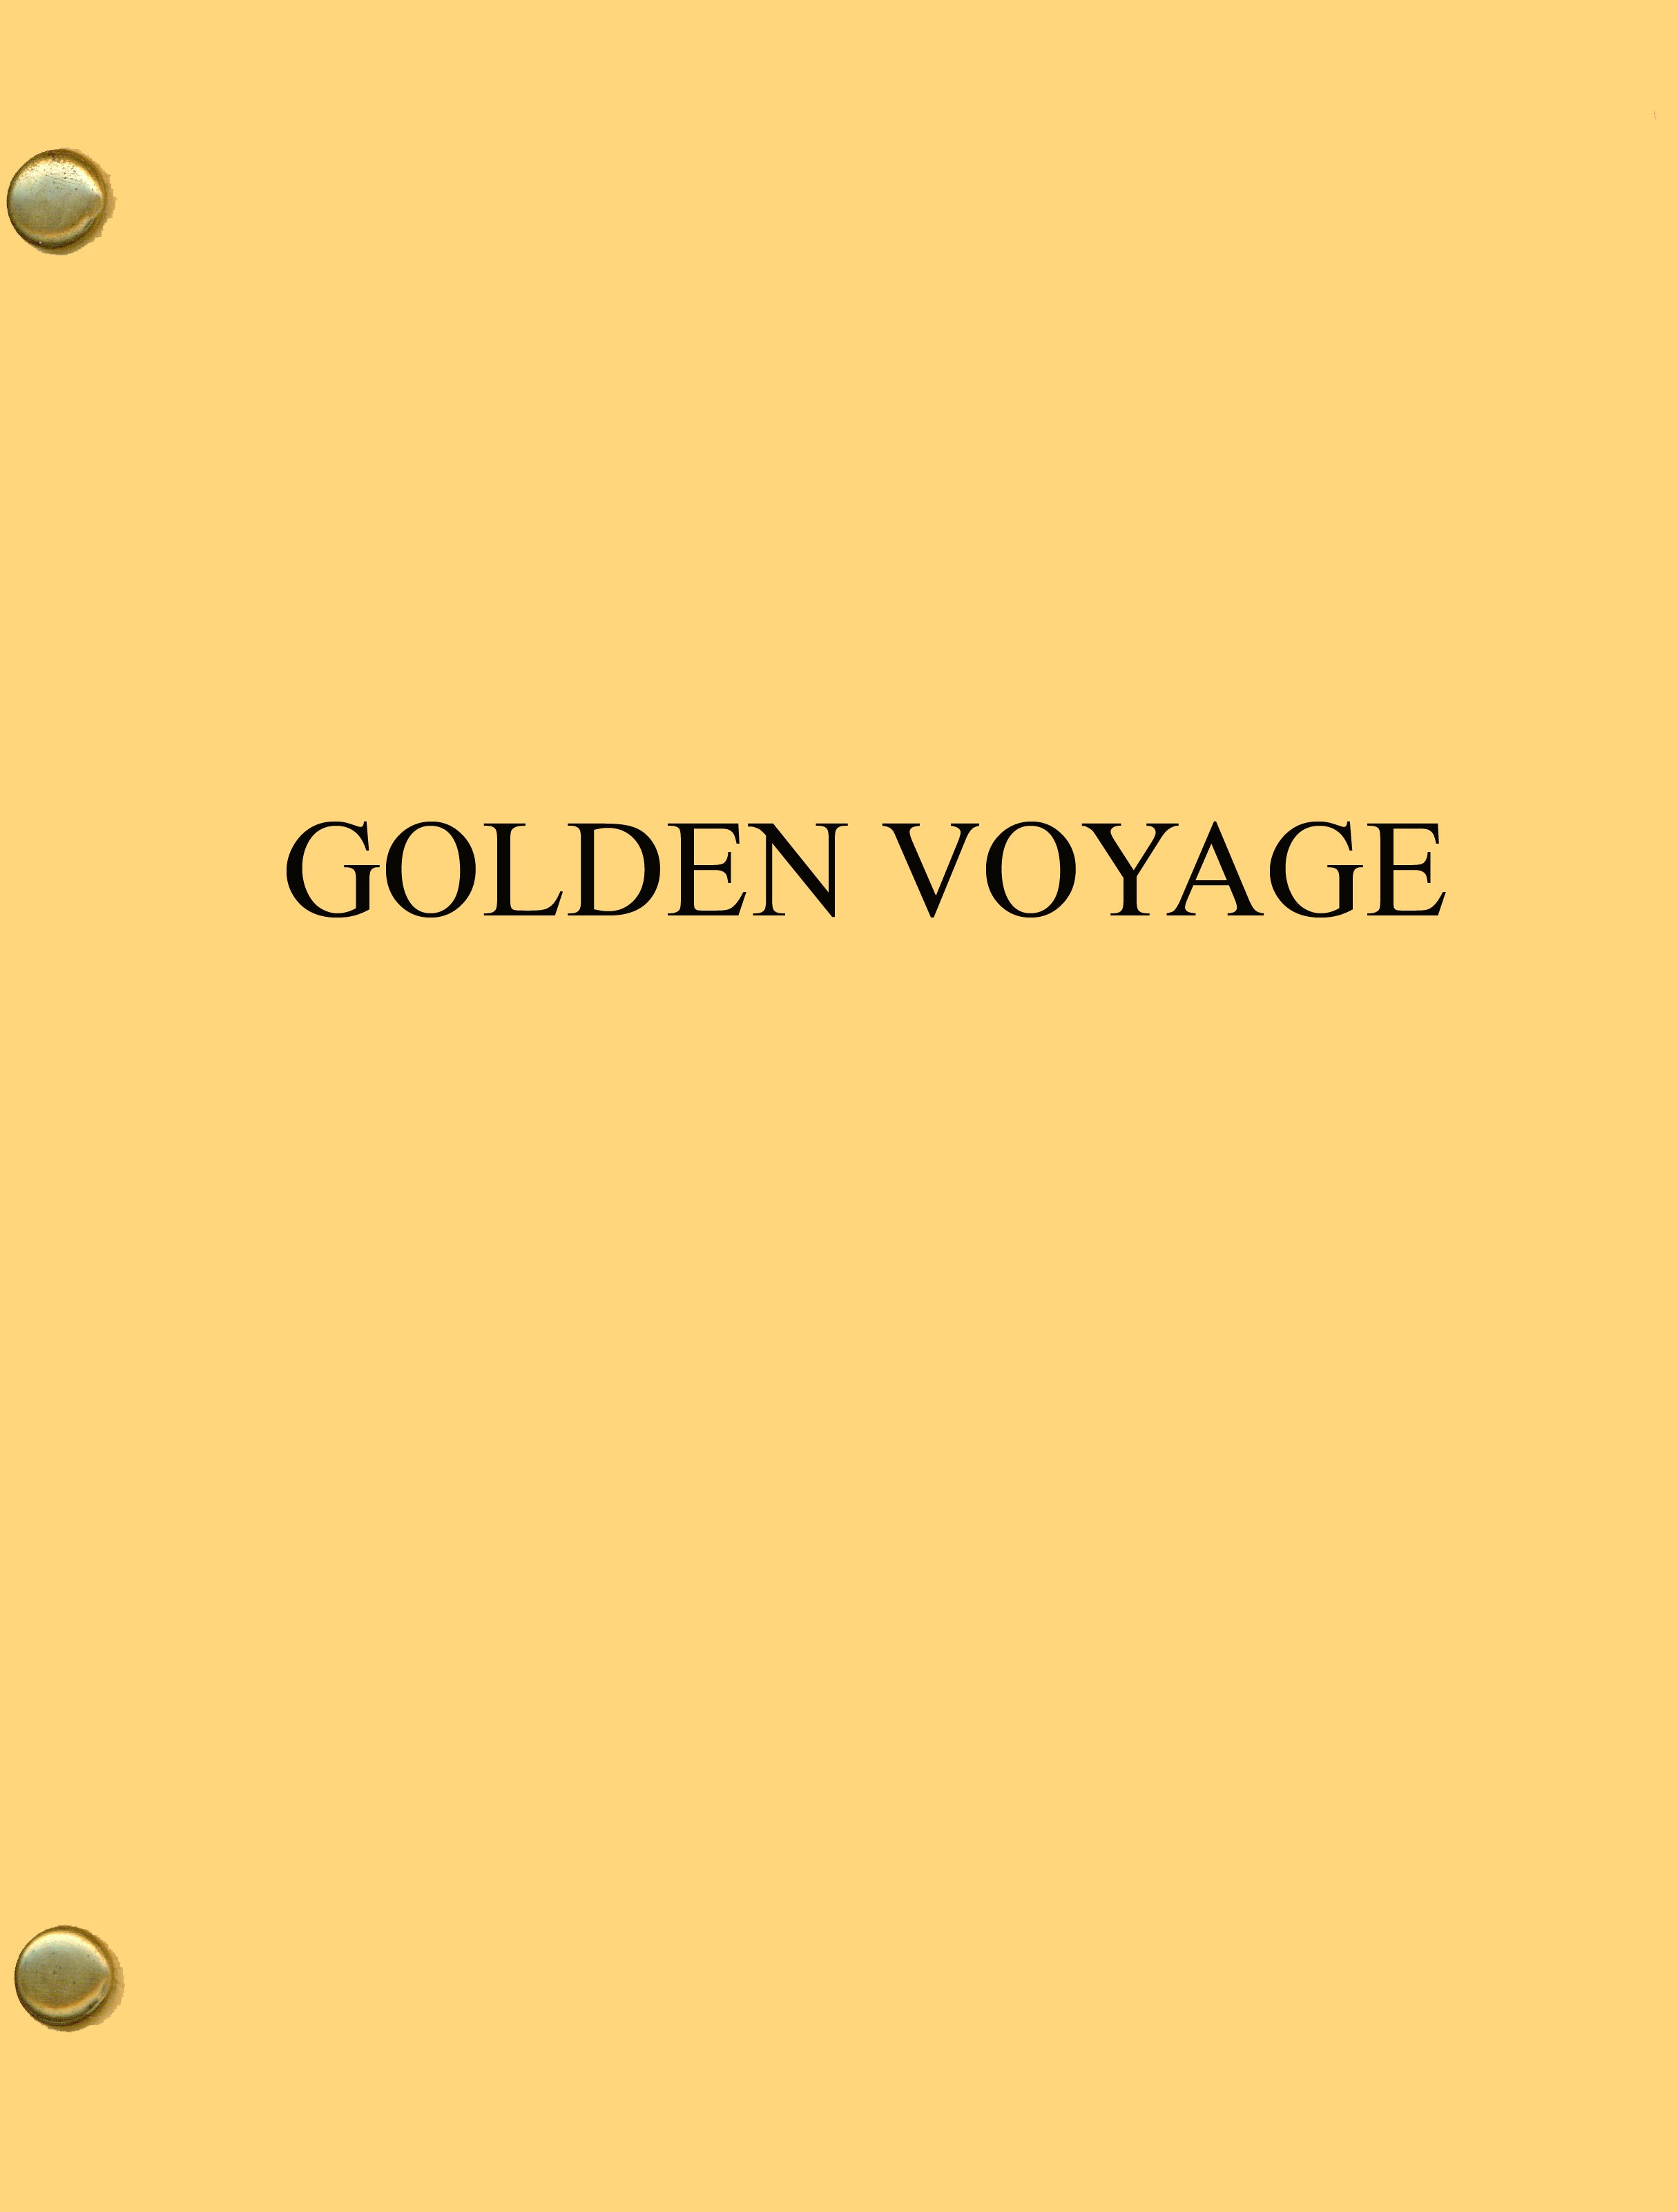 GOLDEN VOYAGE TRILOGY - space saga about mankind's survival in space featuring COSMIC WARRIOR PREQUEL.